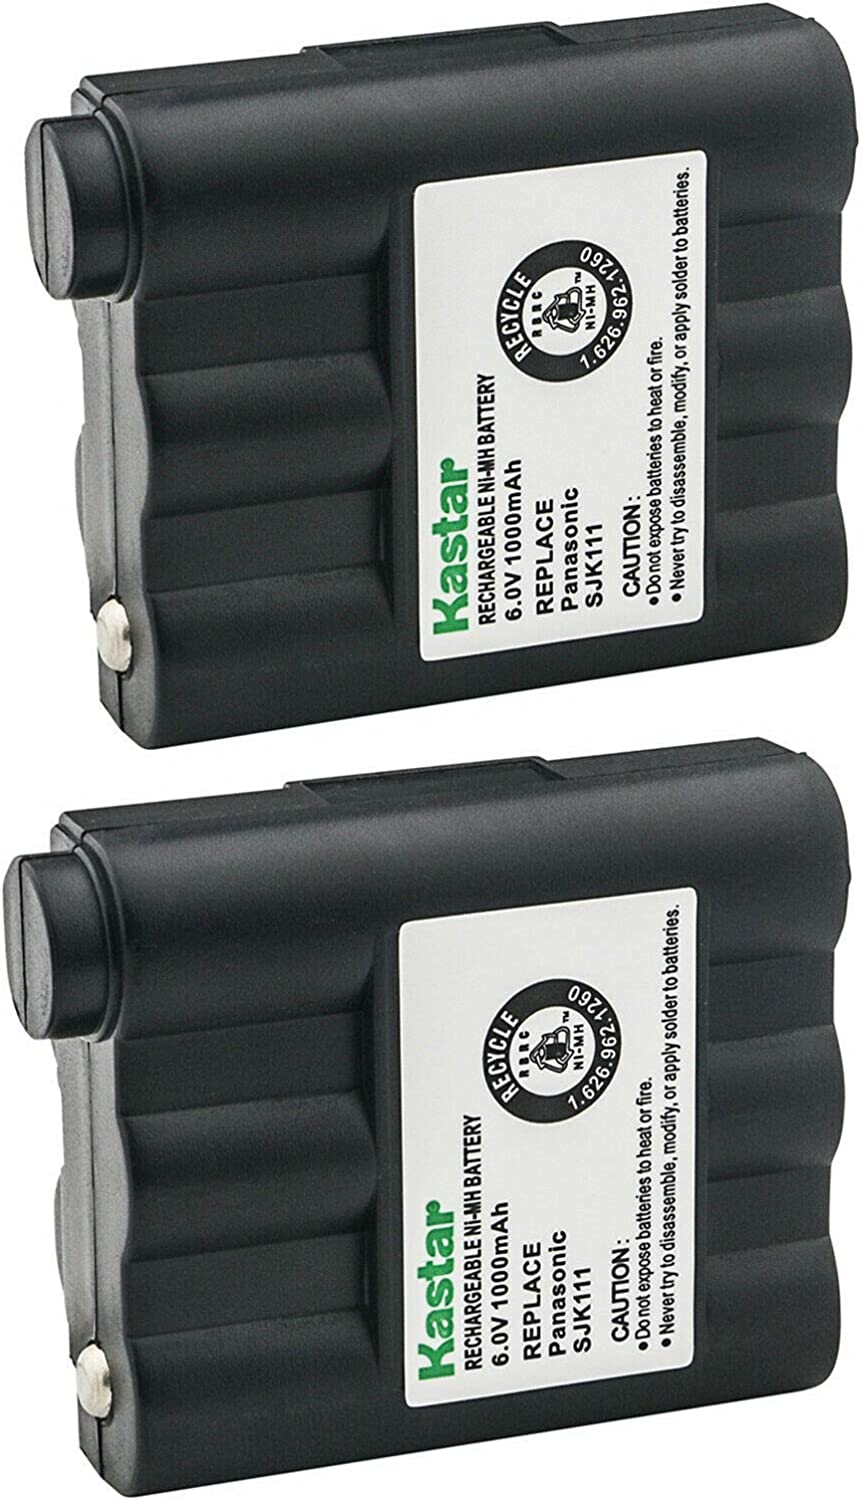 2-Pack Two-Way Radio Battery GXT-710 , GXT-720, GXT-735, GXT-740, GXT-745, GXT-750, GXT-756, GXT-757, GXT-760 - Battery World